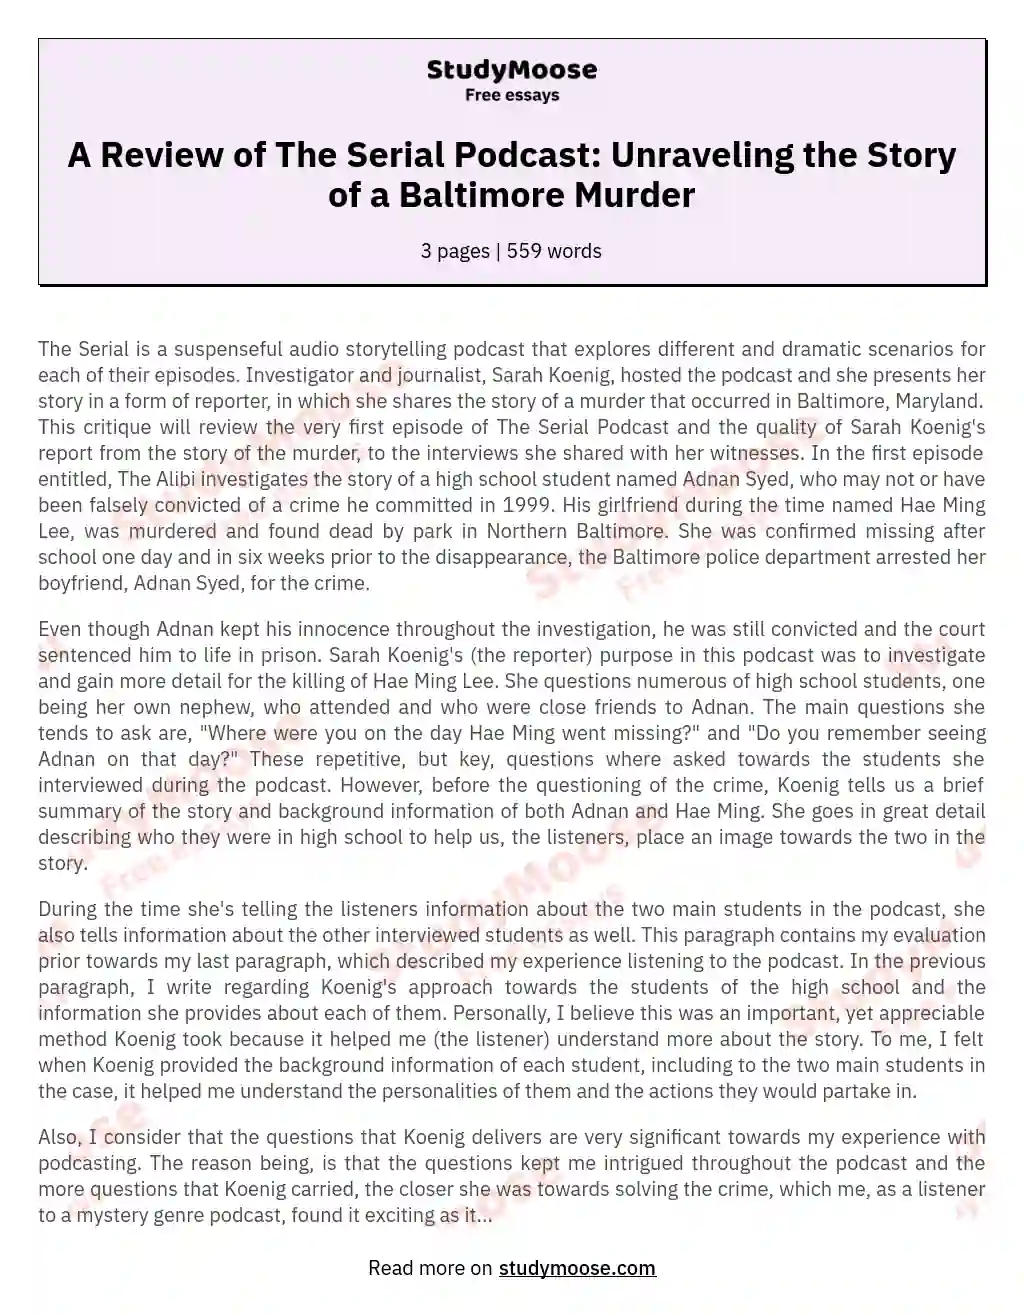 A Review of The Serial Podcast: Unraveling the Story of a Baltimore Murder essay